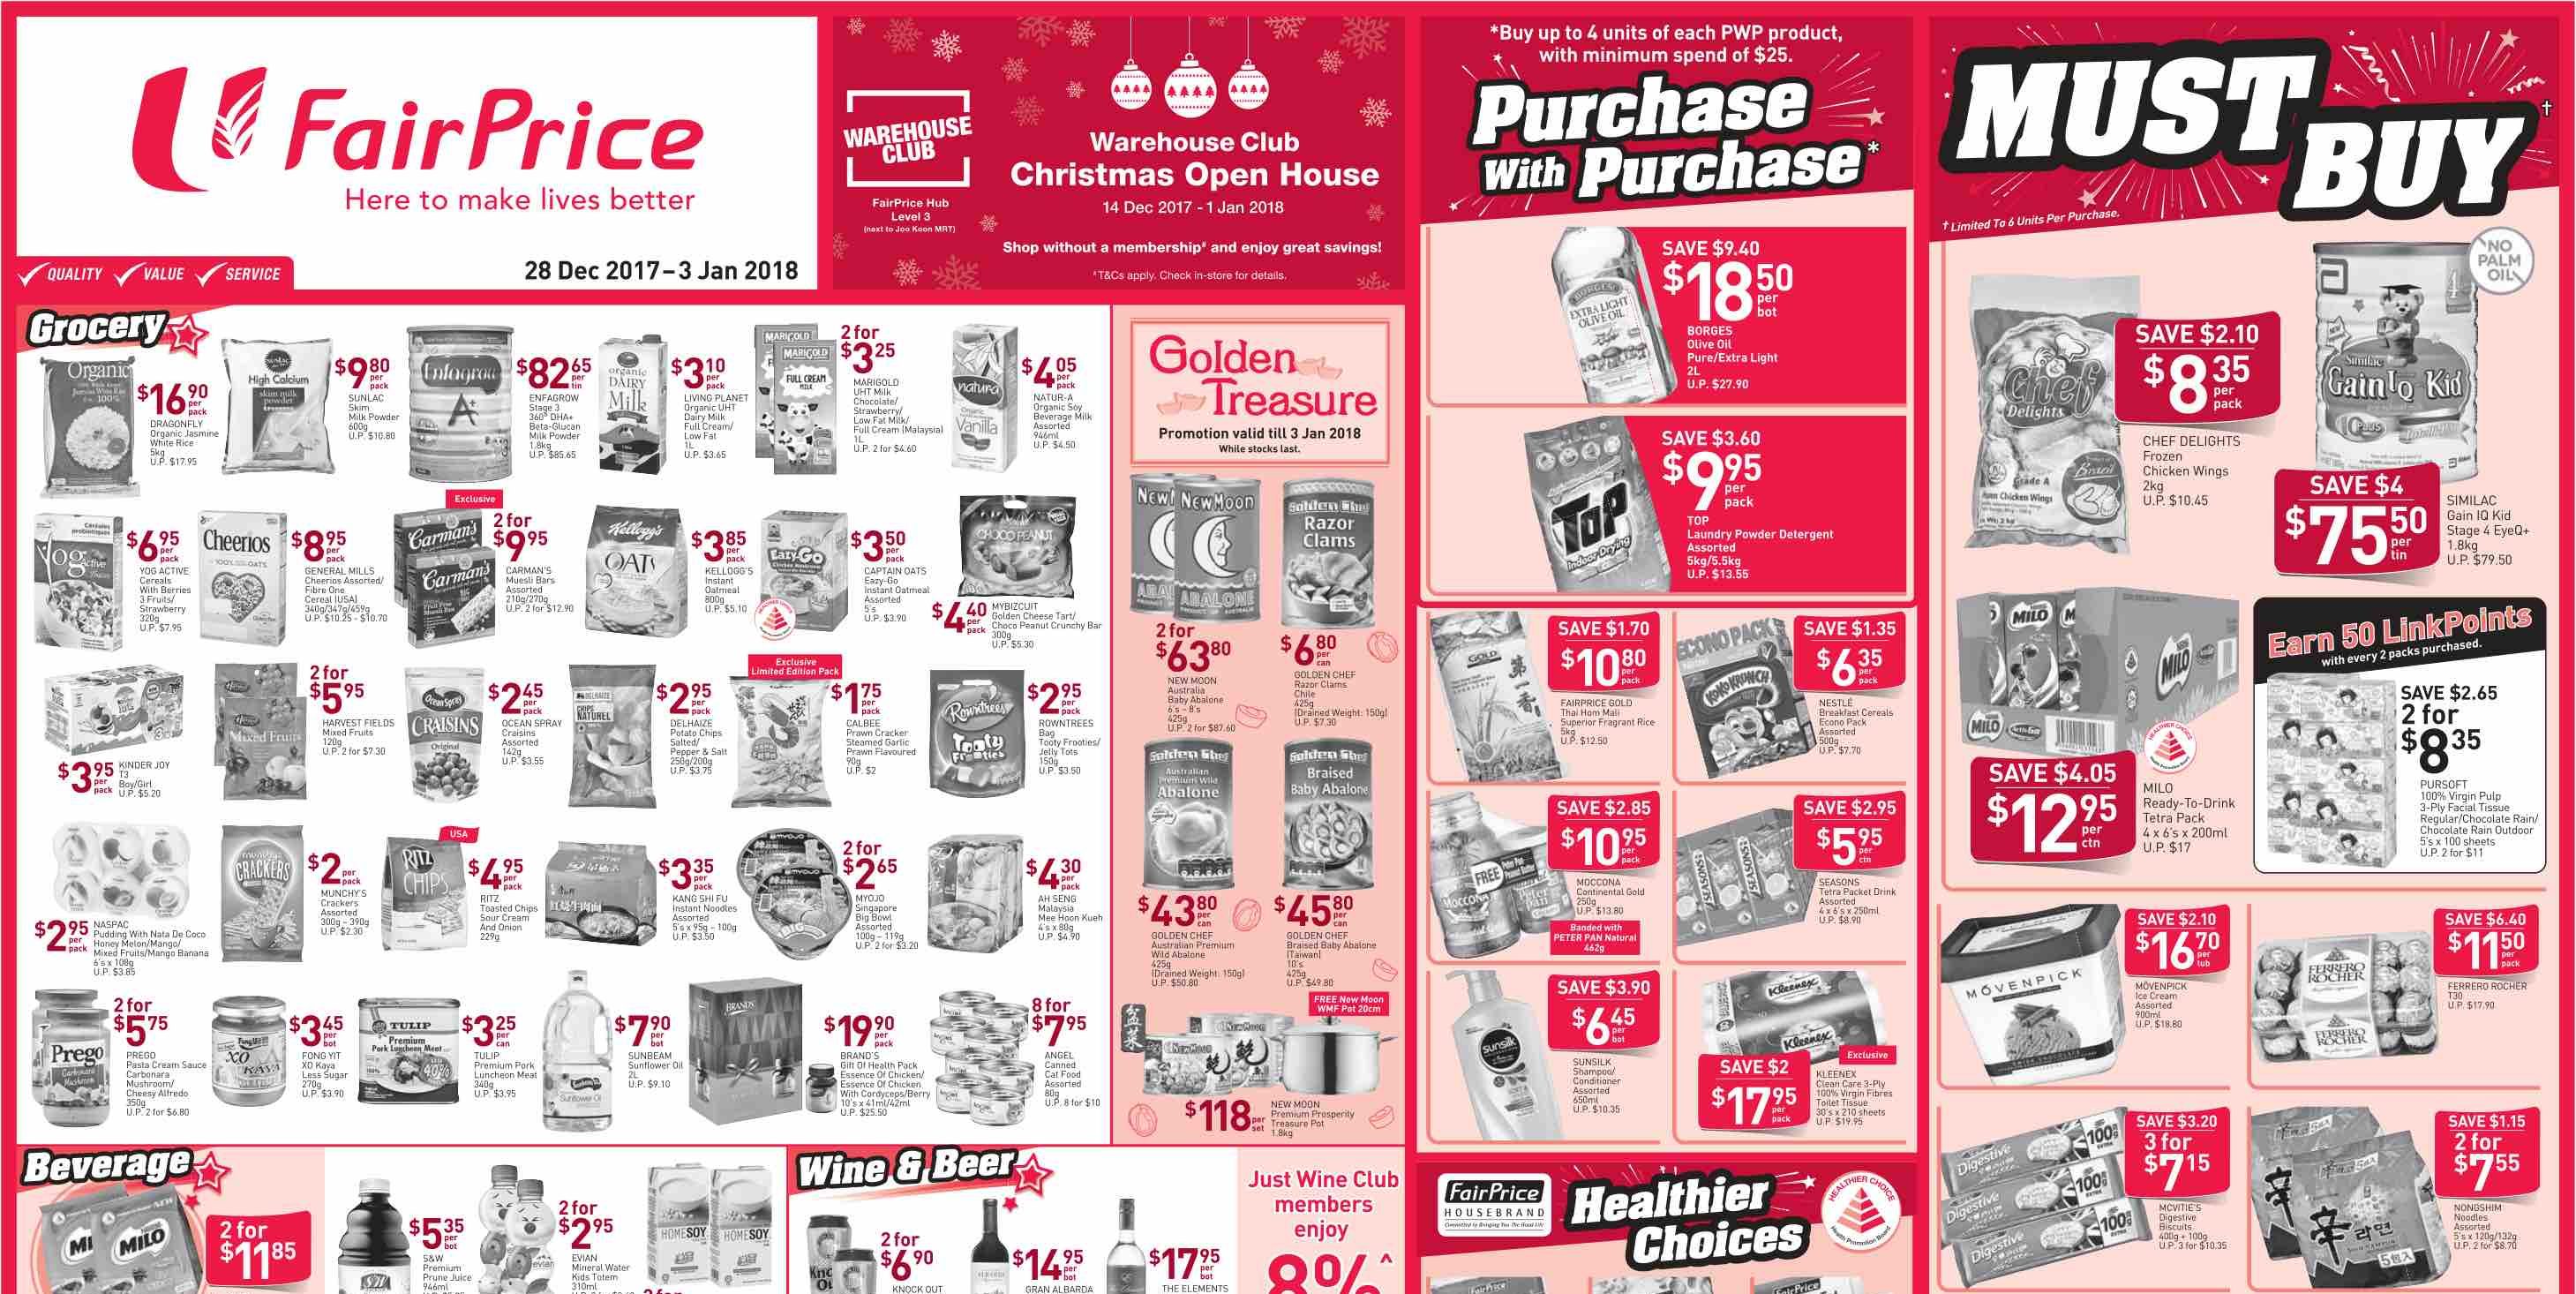 NTUC FairPrice Singapore Your Weekly Saver Promotions 28 Dec 2017 – 3 Jan 2018